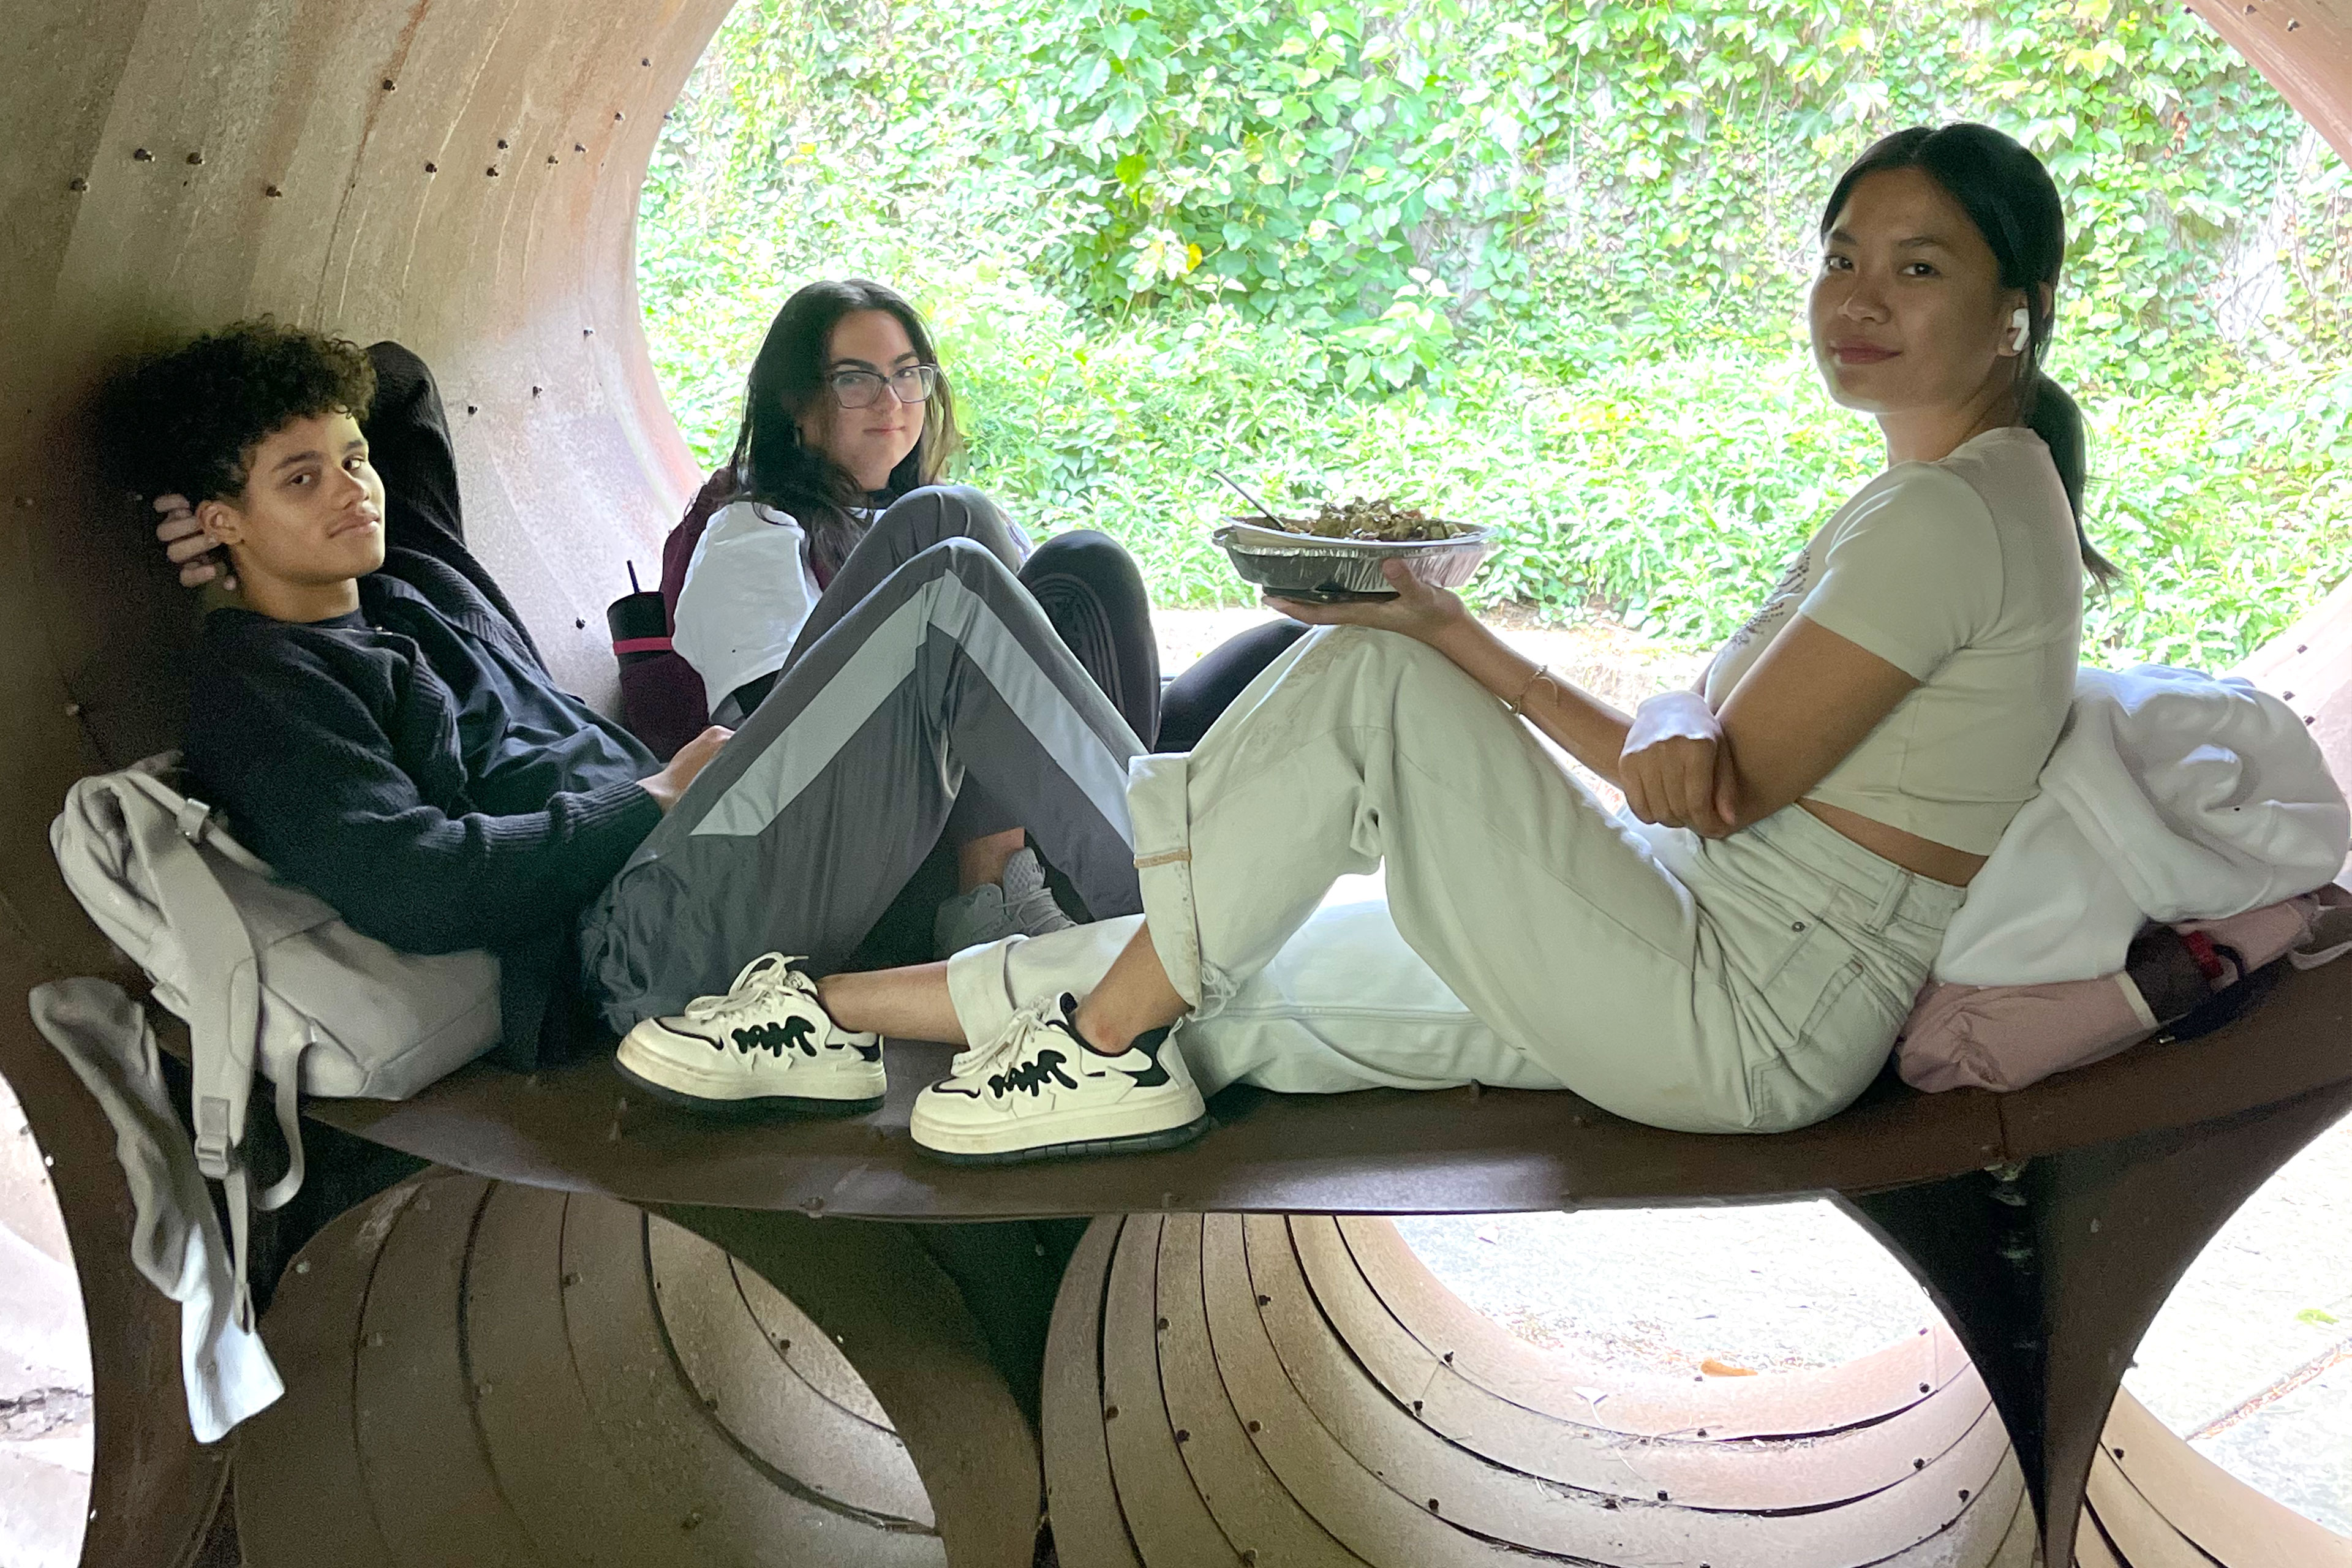 Students sitting inside a circular structure